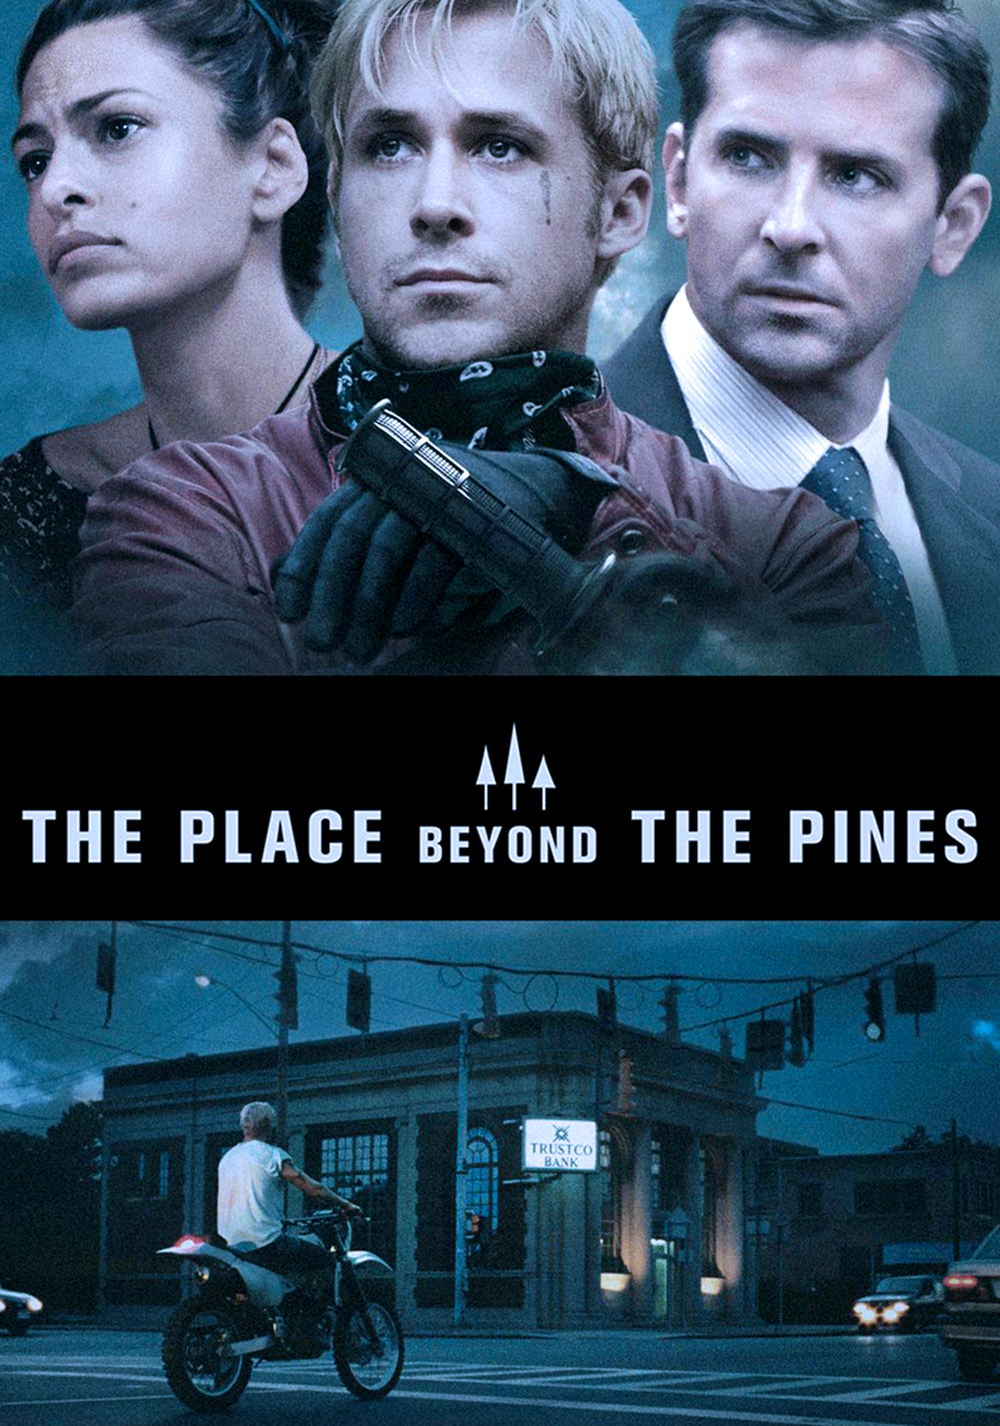 The Place Beyond the Pines Movie Poster - ID: 138726 - Image Abyss - Where To Watch The Place Beyond The Pines